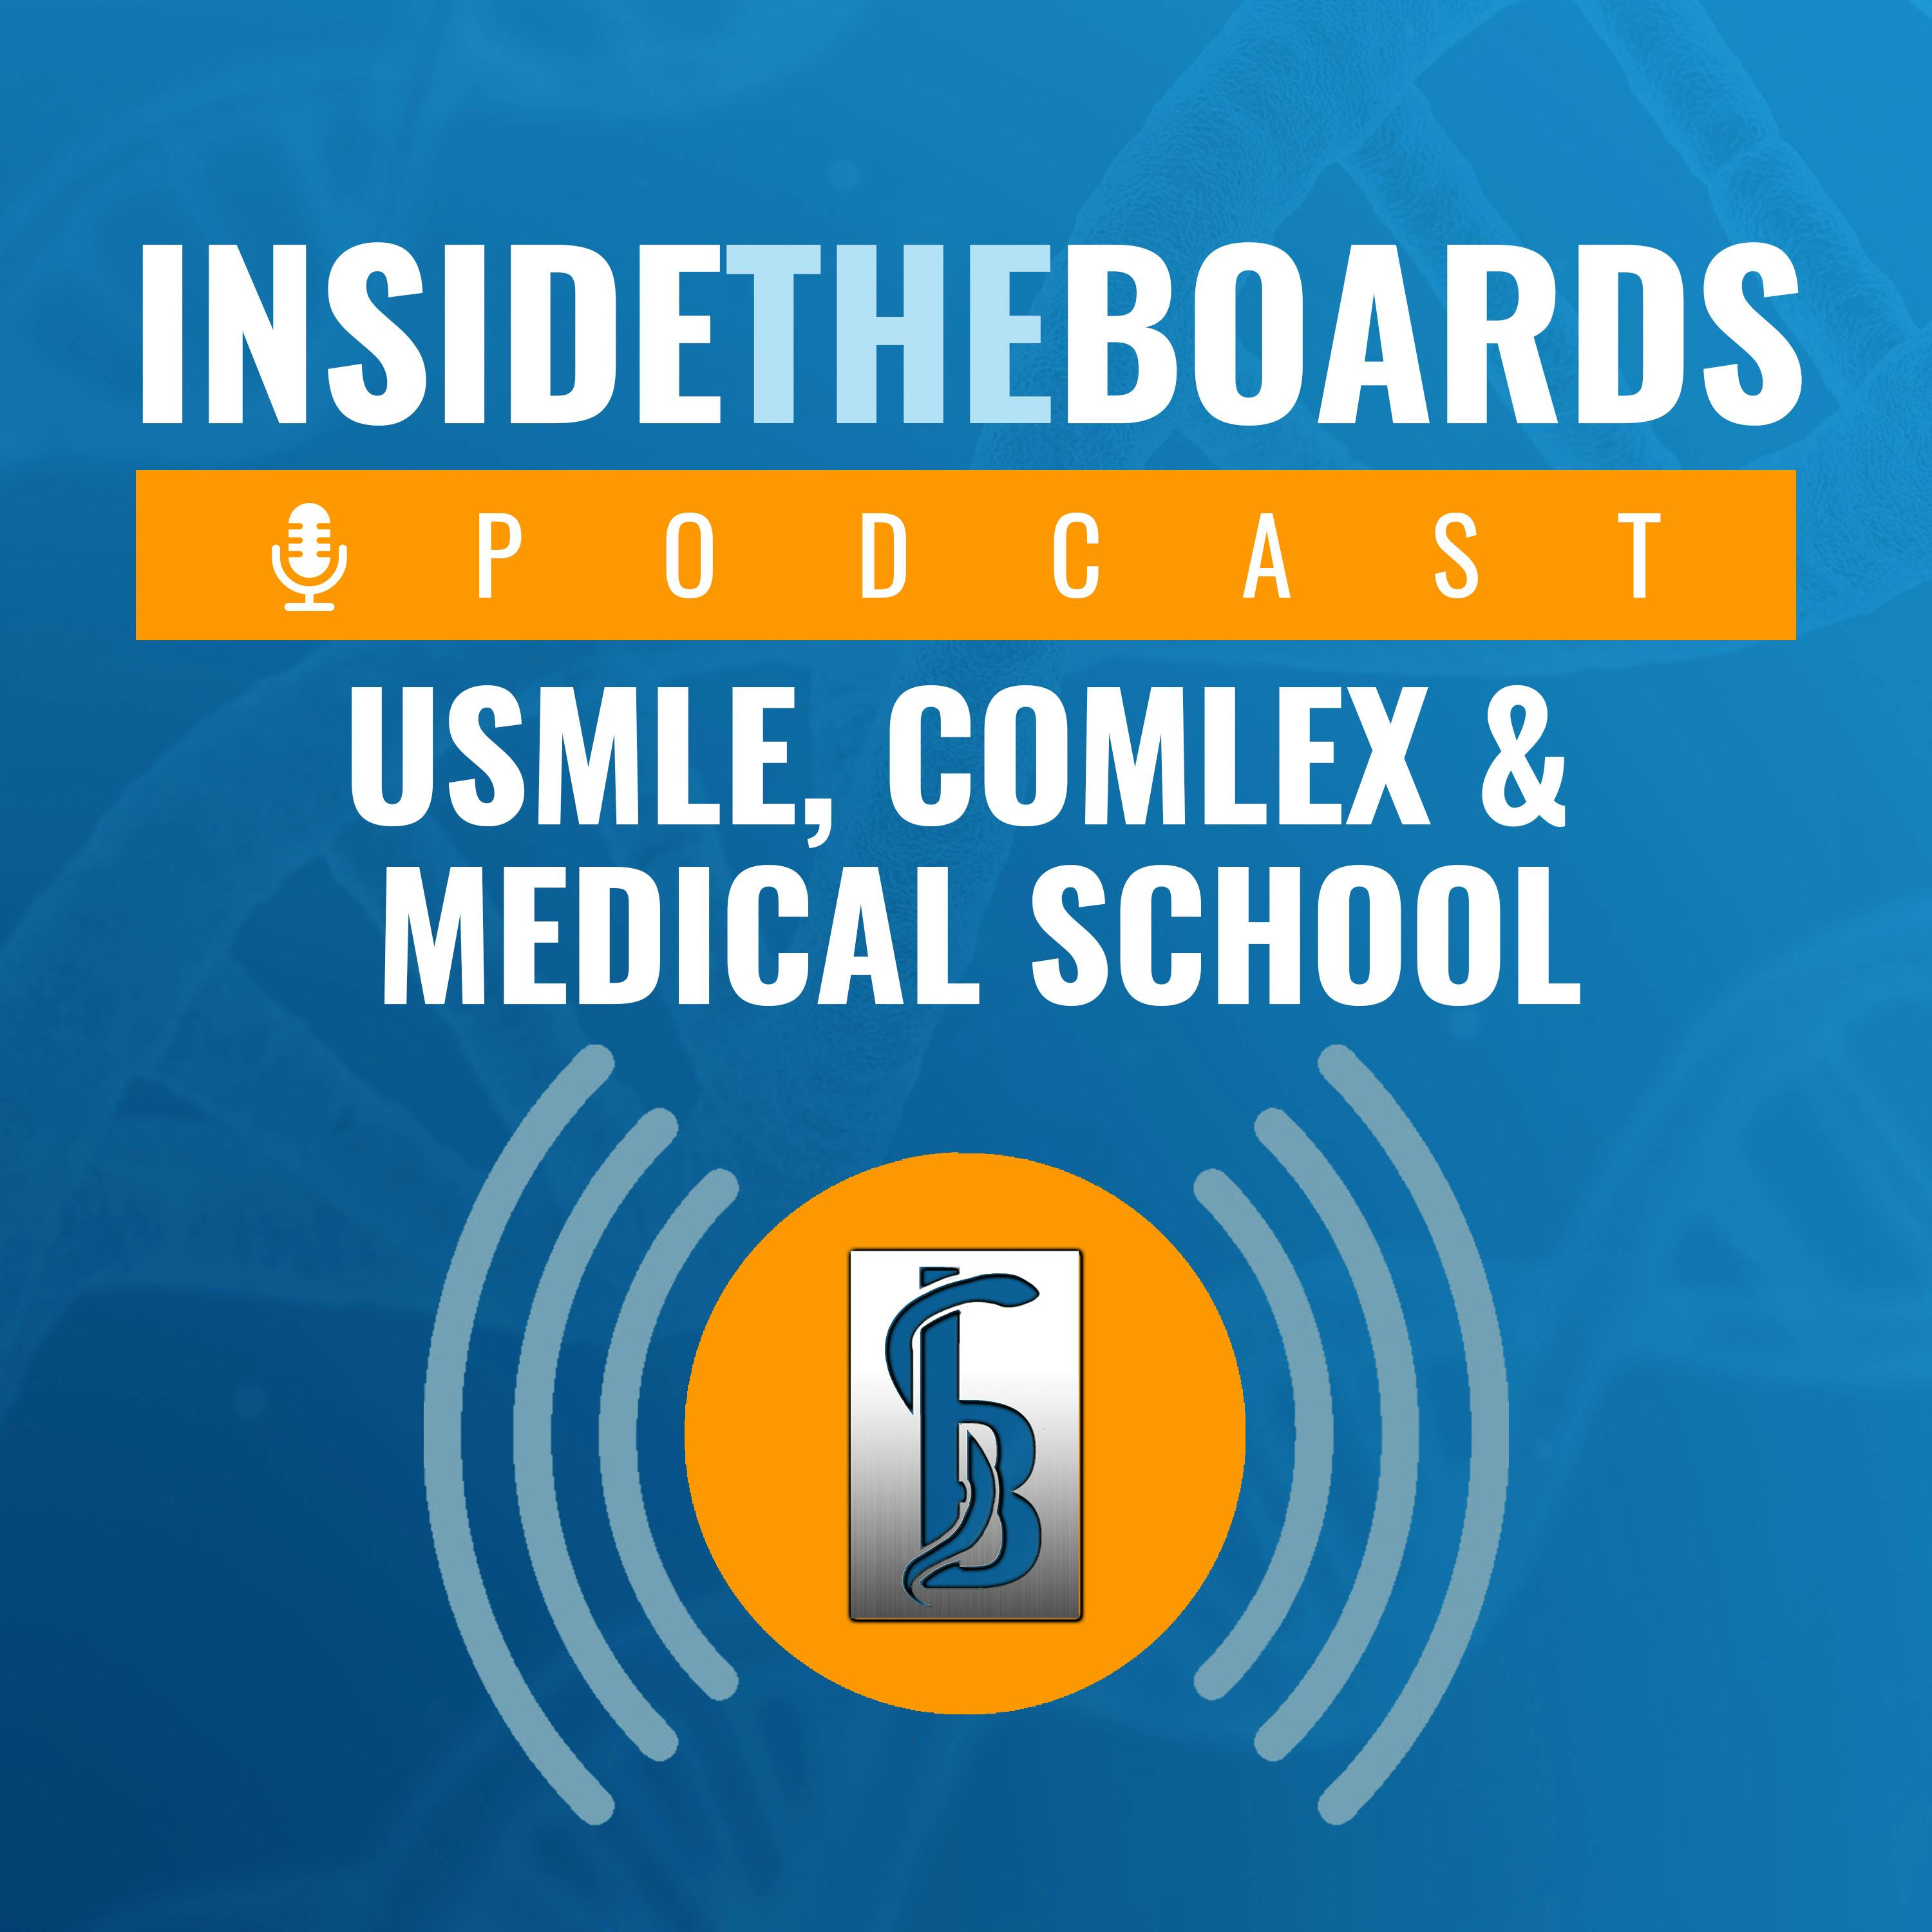 CROSSPOST: Education Through Social Media, Limited Supplies in the ER, and Caution with NSAIDs | Adam Goodcoff, M4 and Co-founder of The MedLife